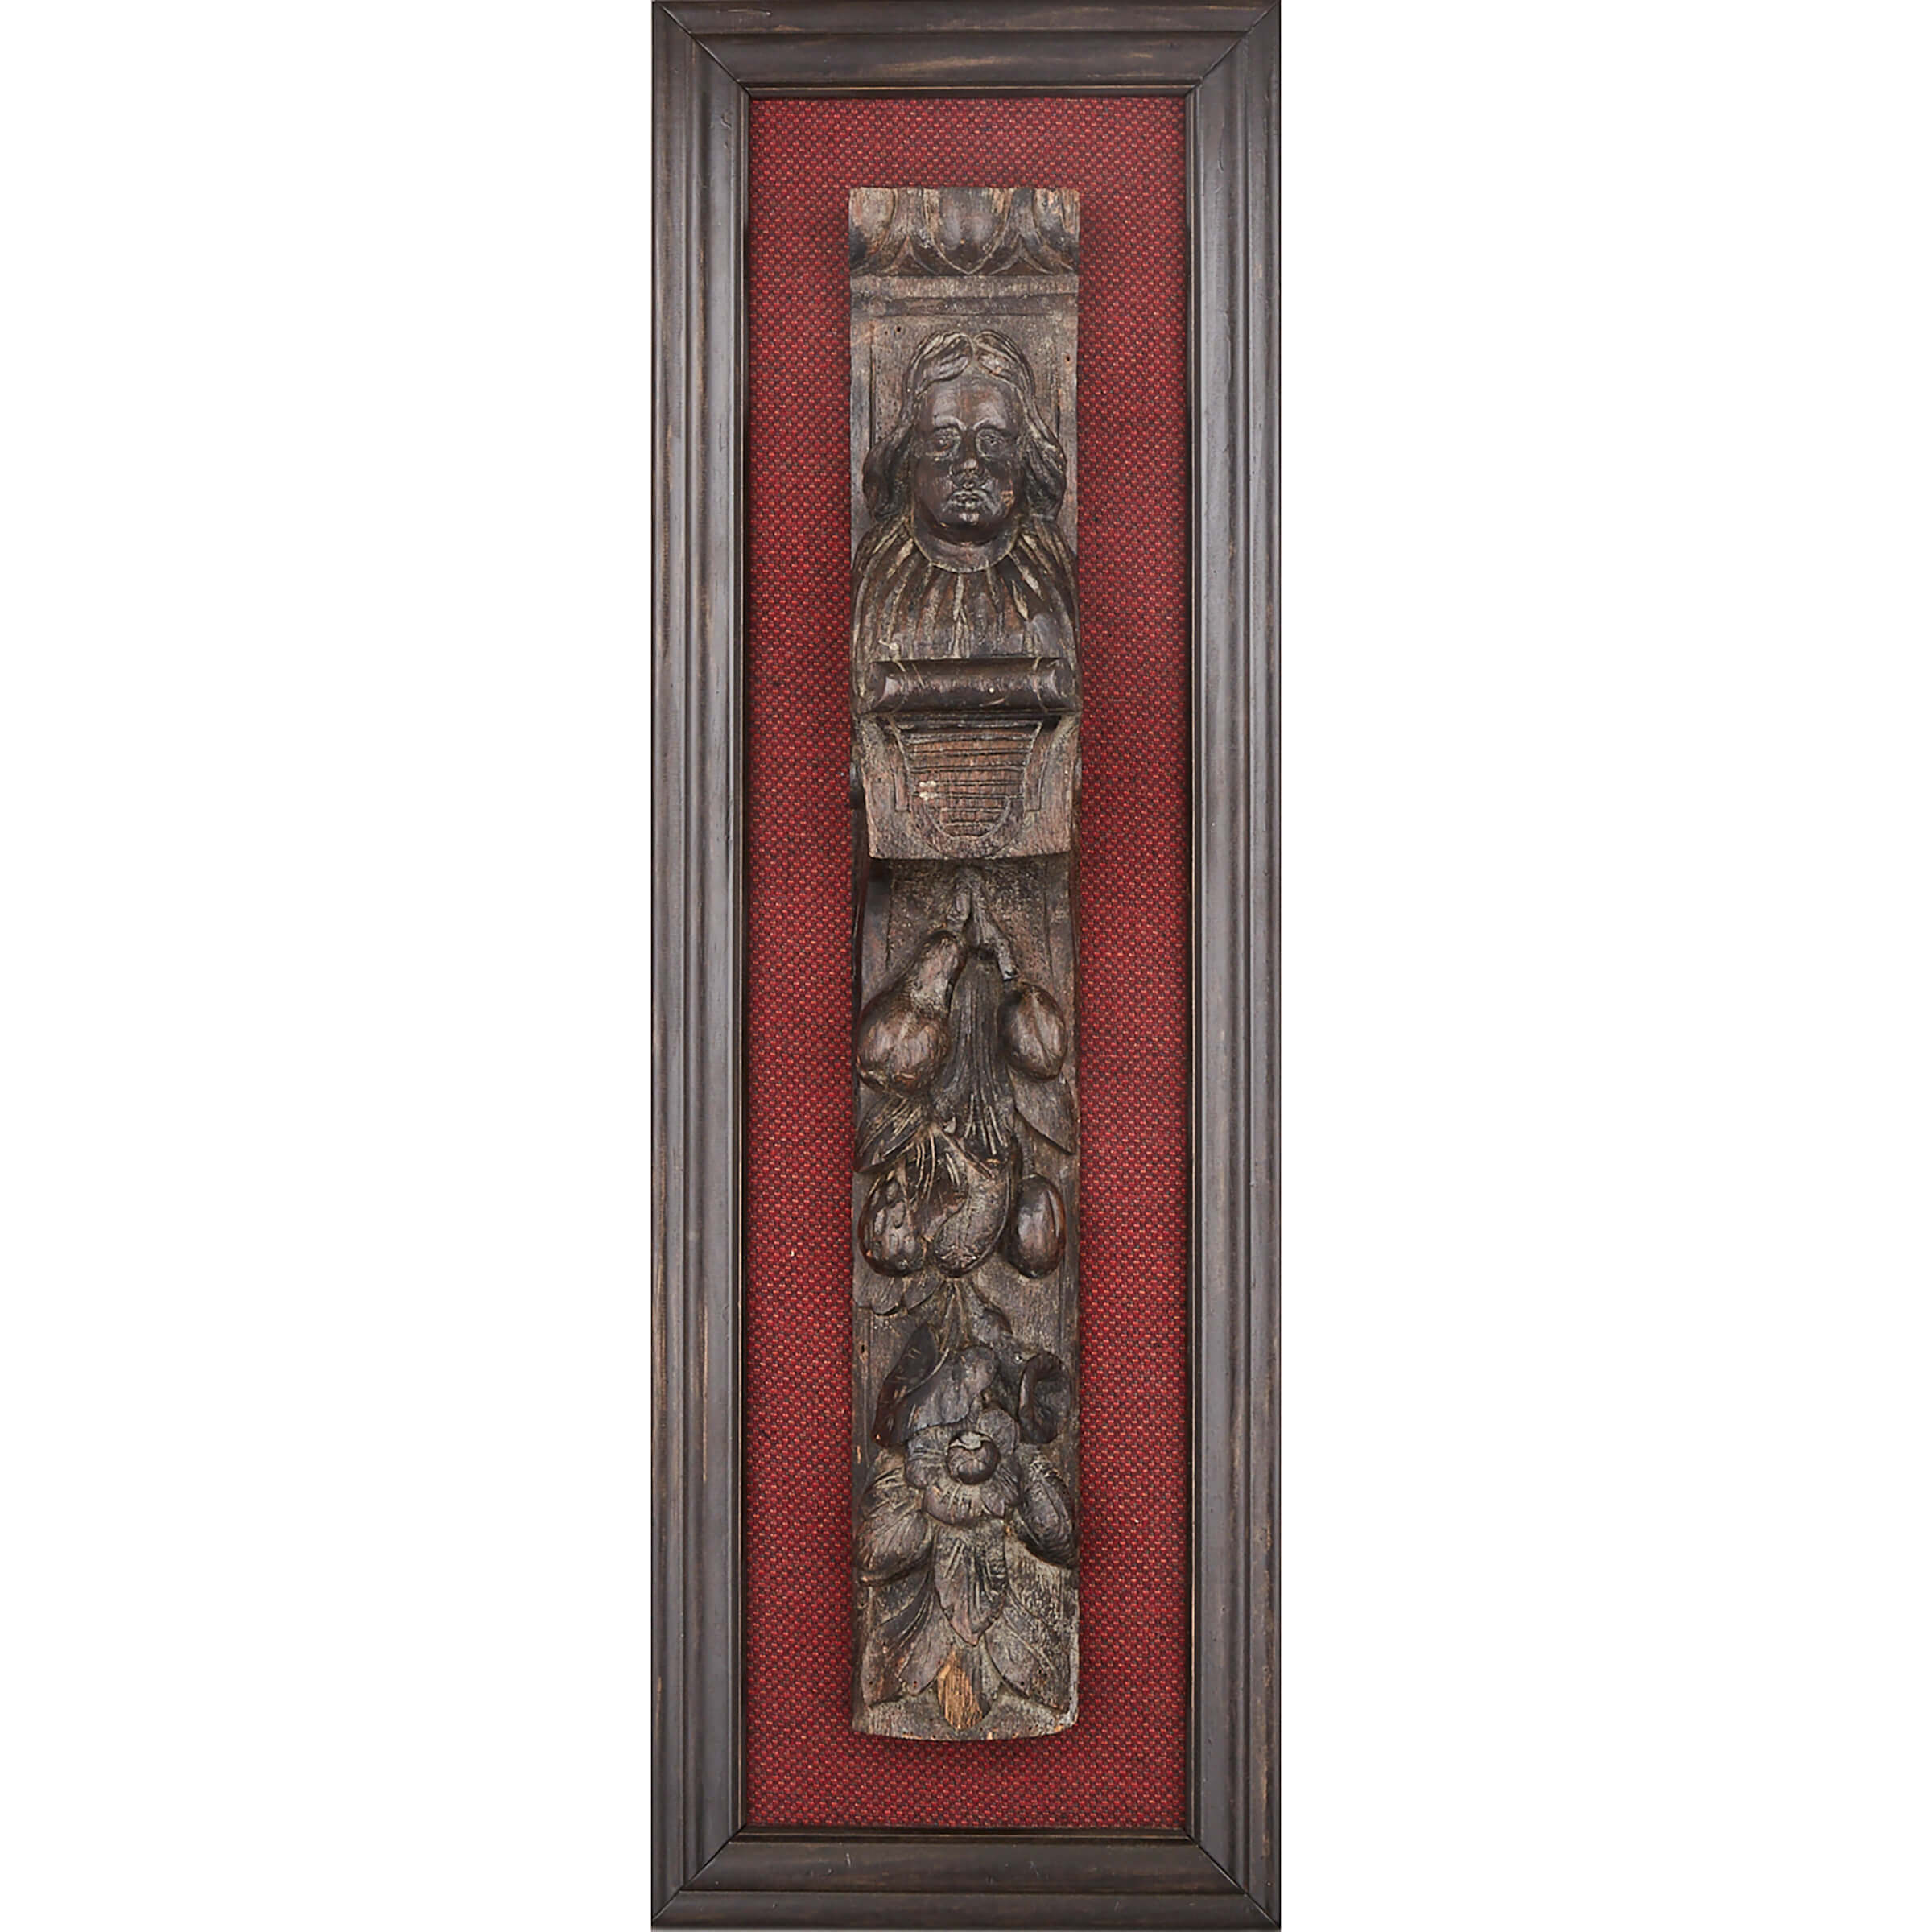 English Carved Oak Figural Term, 17th century